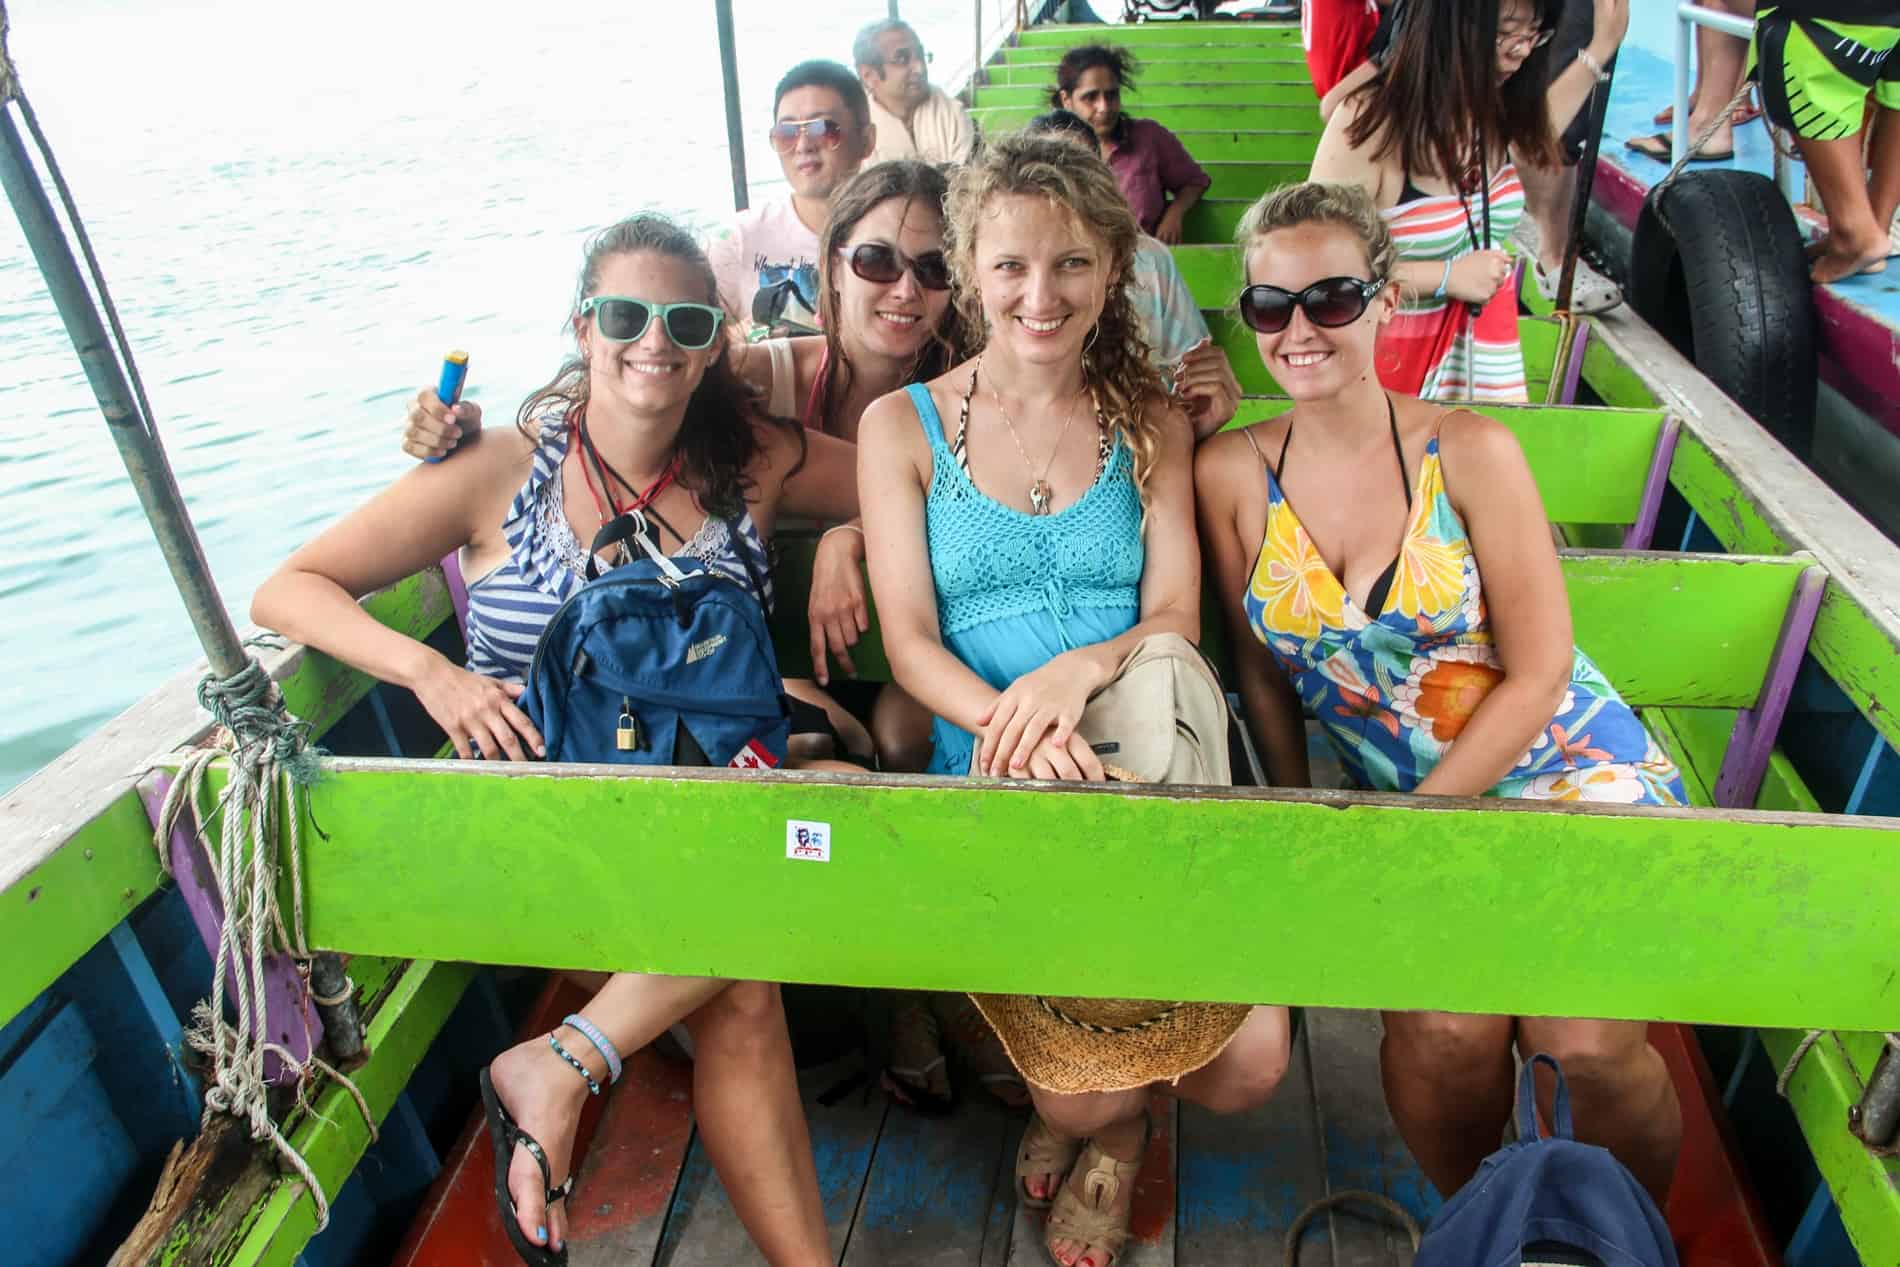 A group of friends Thailand island hopping by ferry, smiling at the camersa from green seats.